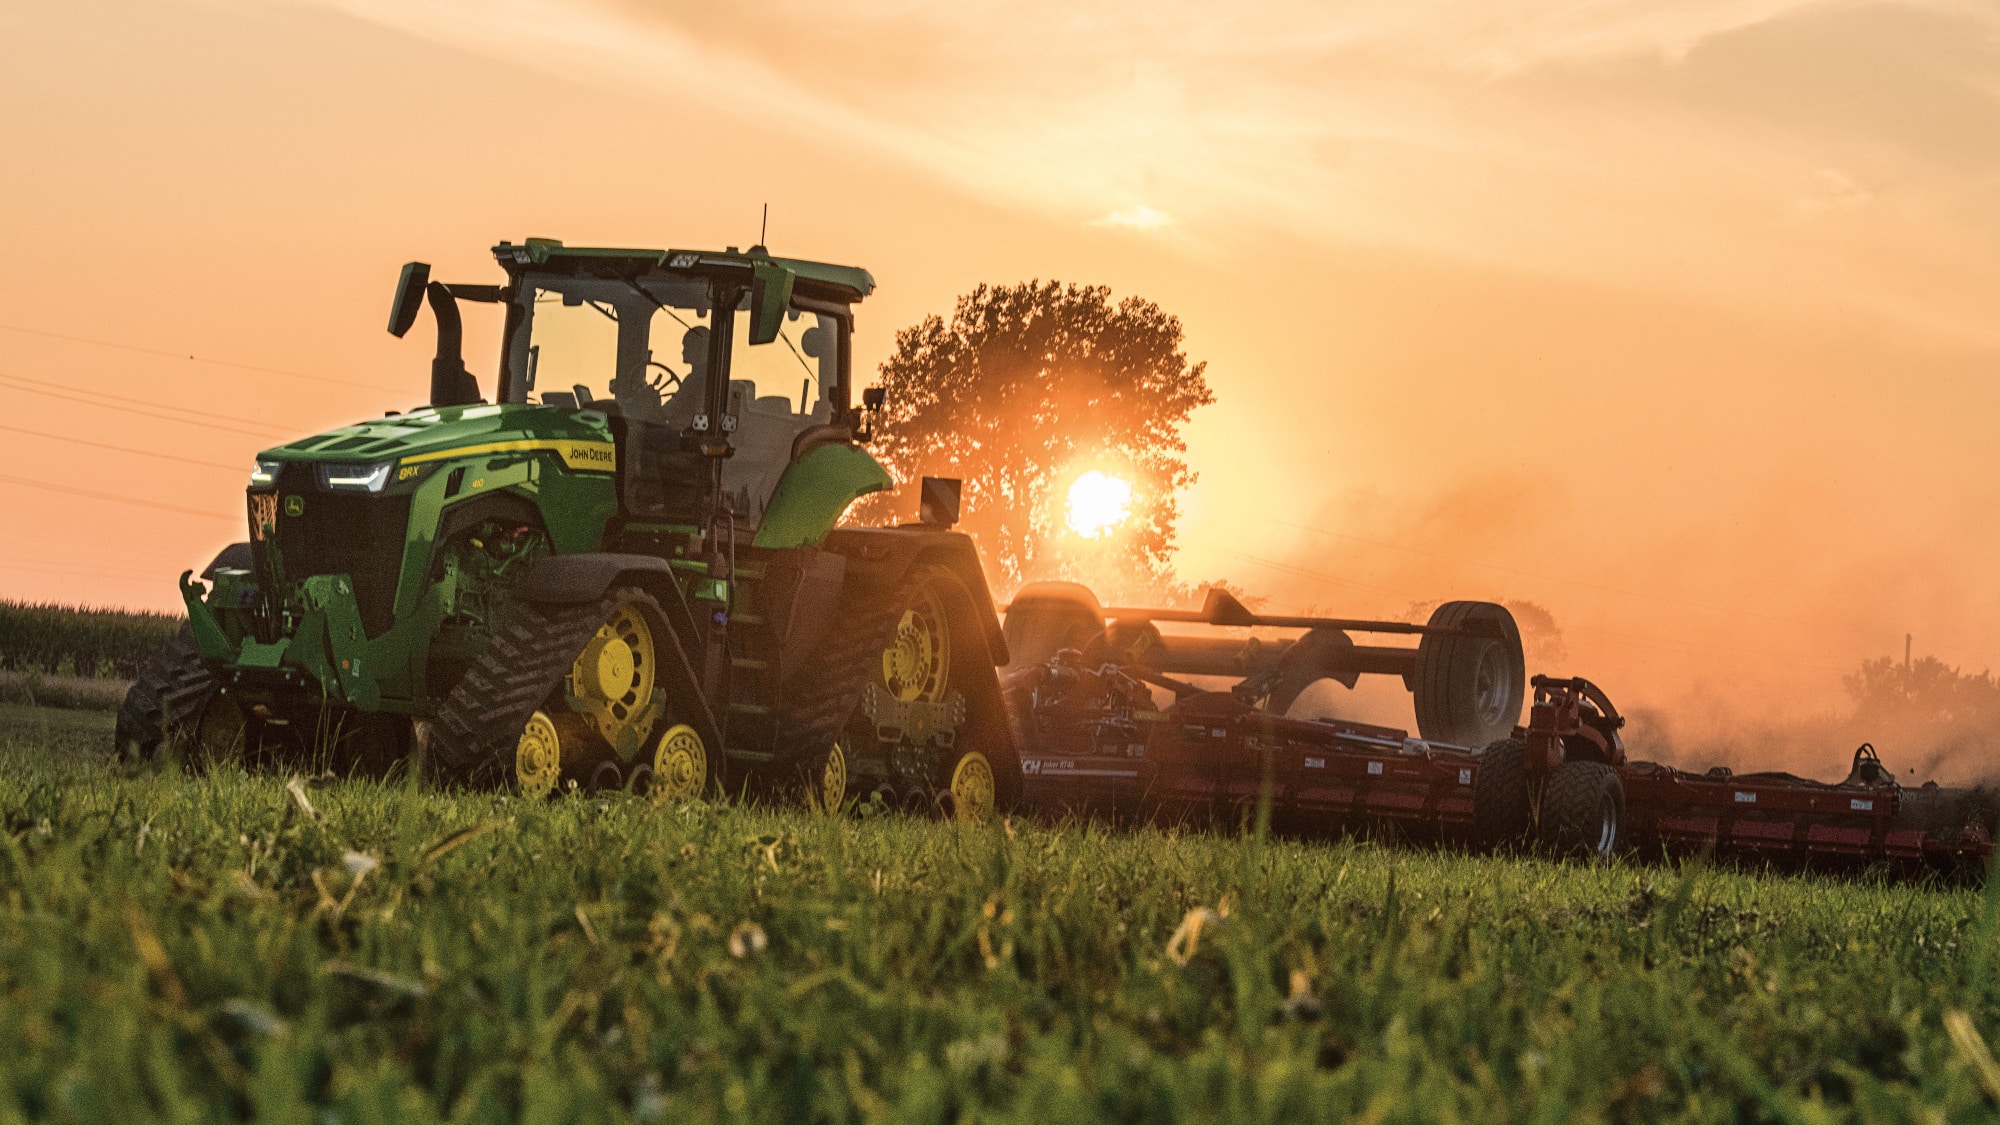 Comfort, quality, and machine uptime are focus of new John Deere Sprayers